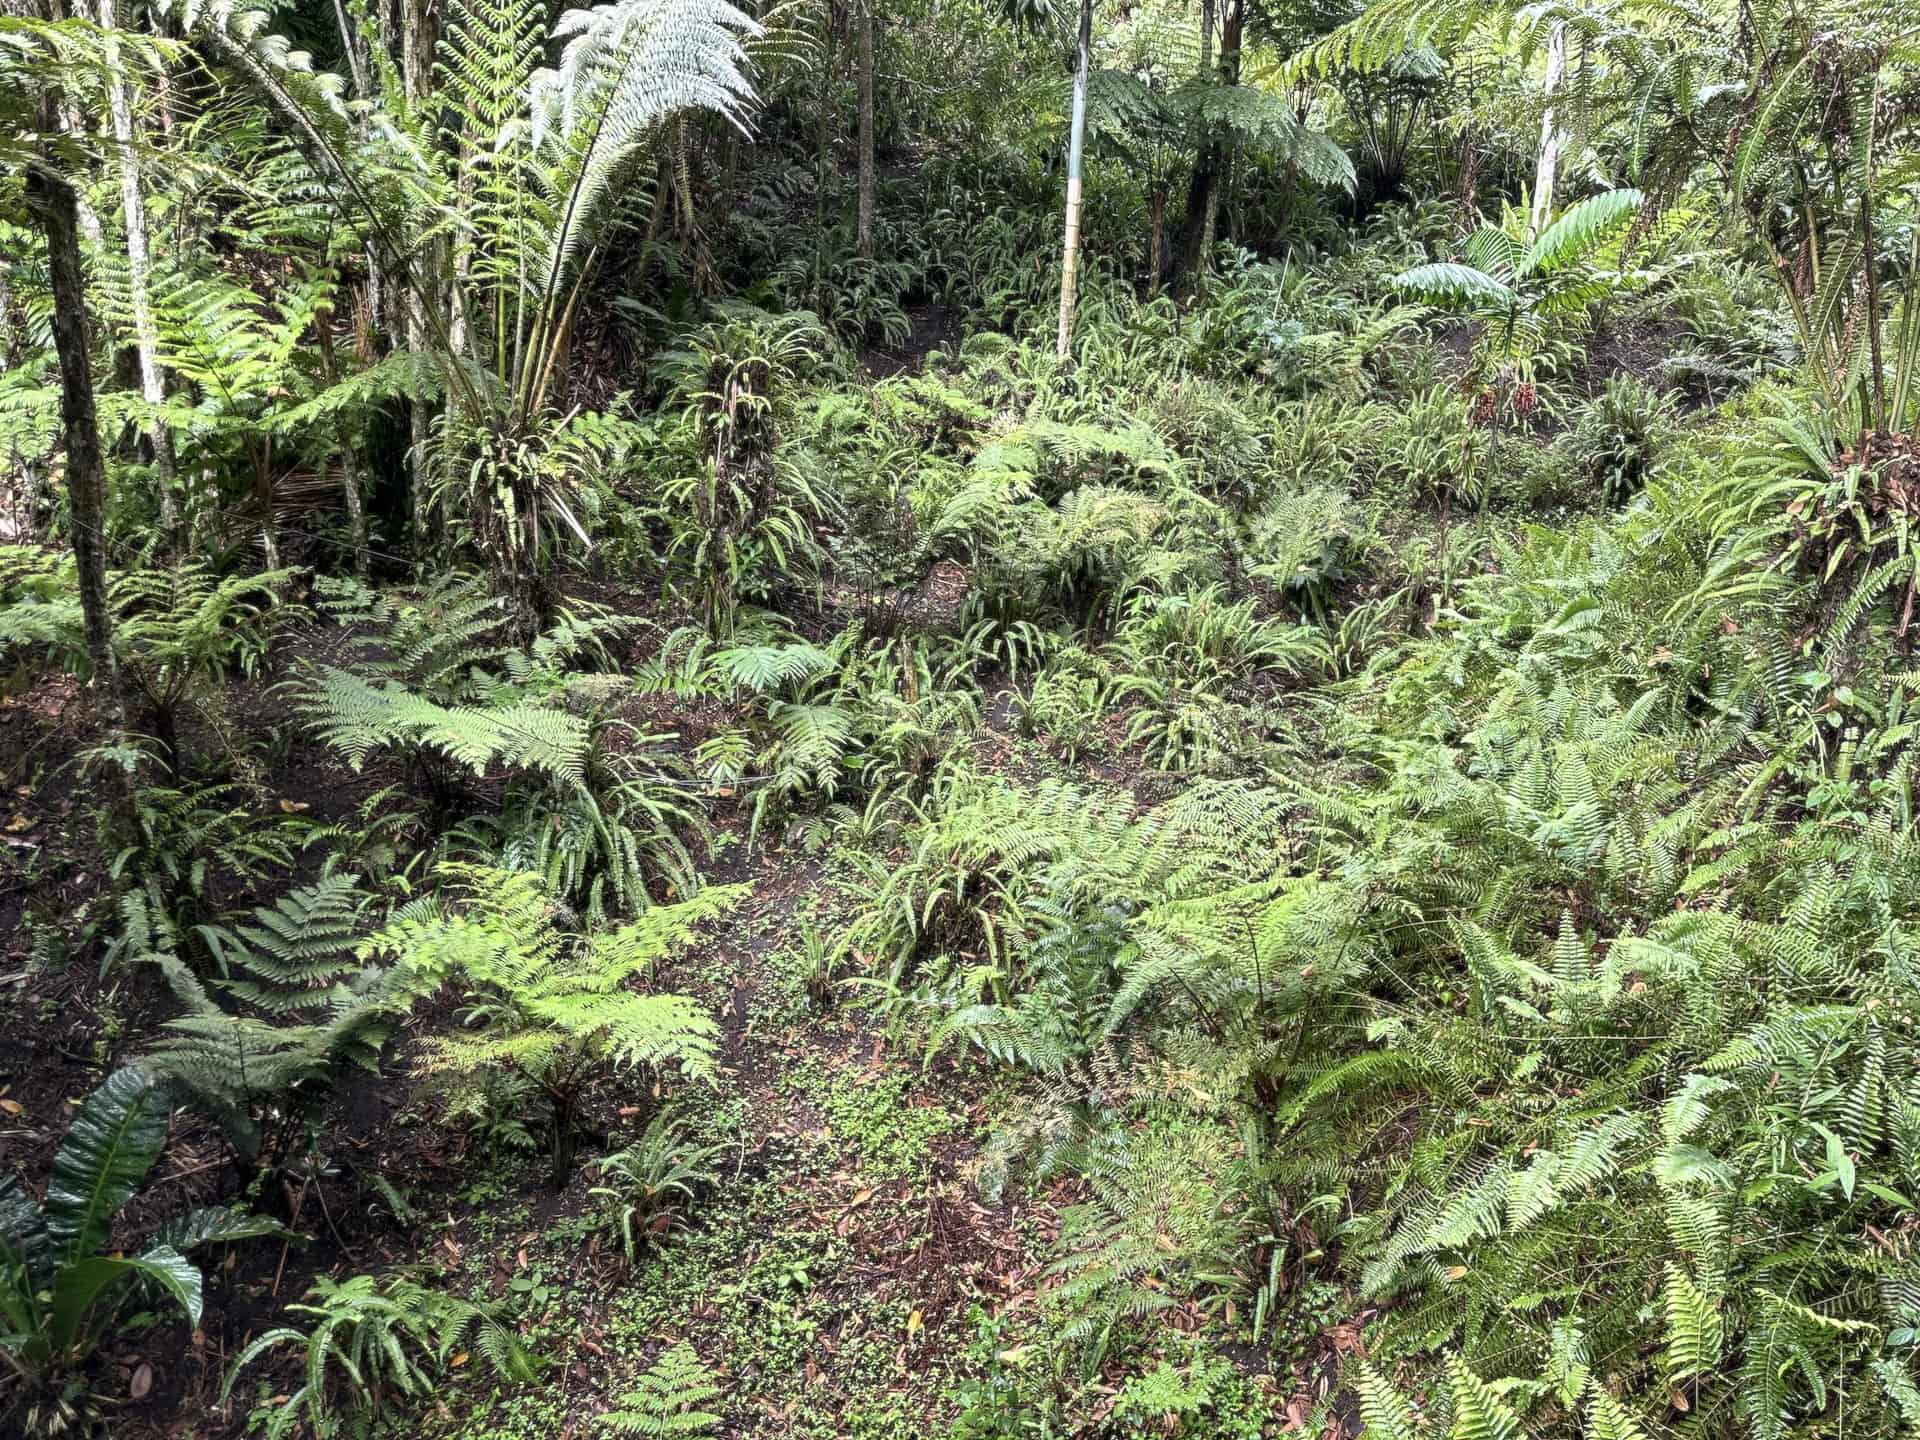 Ferns at the Quindío Botanical Garden in Calarcá, Colombia